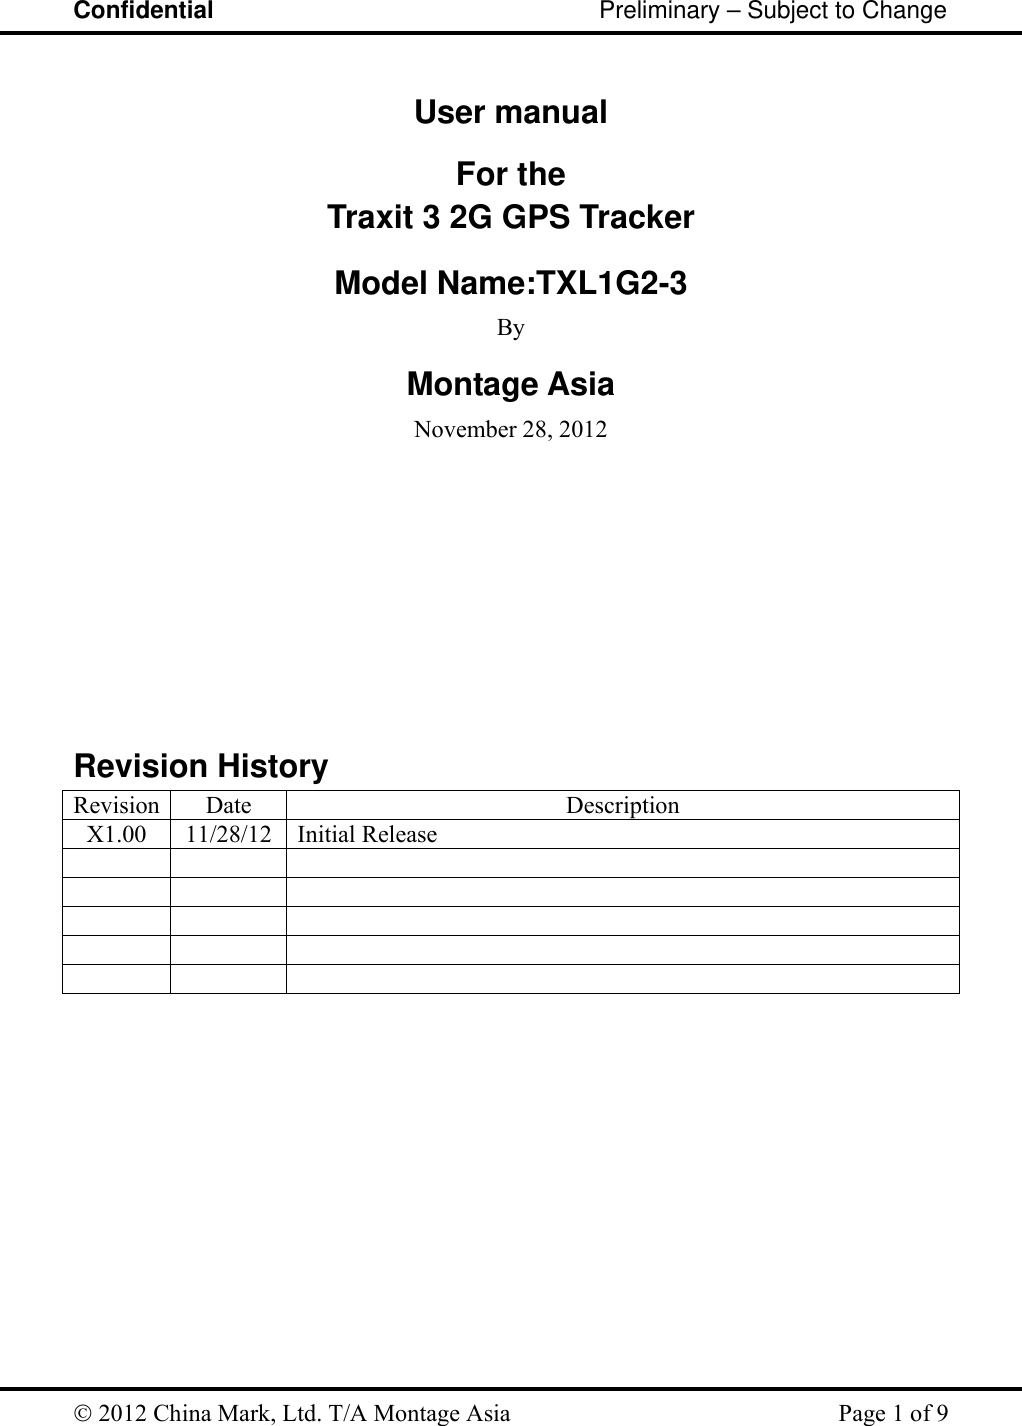 Confidential                                                         Preliminary – Subject to Change   2012 China Mark, Ltd. T/A Montage Asia   Page 1 of 9  User manual For the Traxit 3 2G GPS Tracker  Model Name:TXL1G2-3  By Montage Asia November 28, 2012           Revision History Revision Date  Description X1.00 11/28/12 Initial Release                           